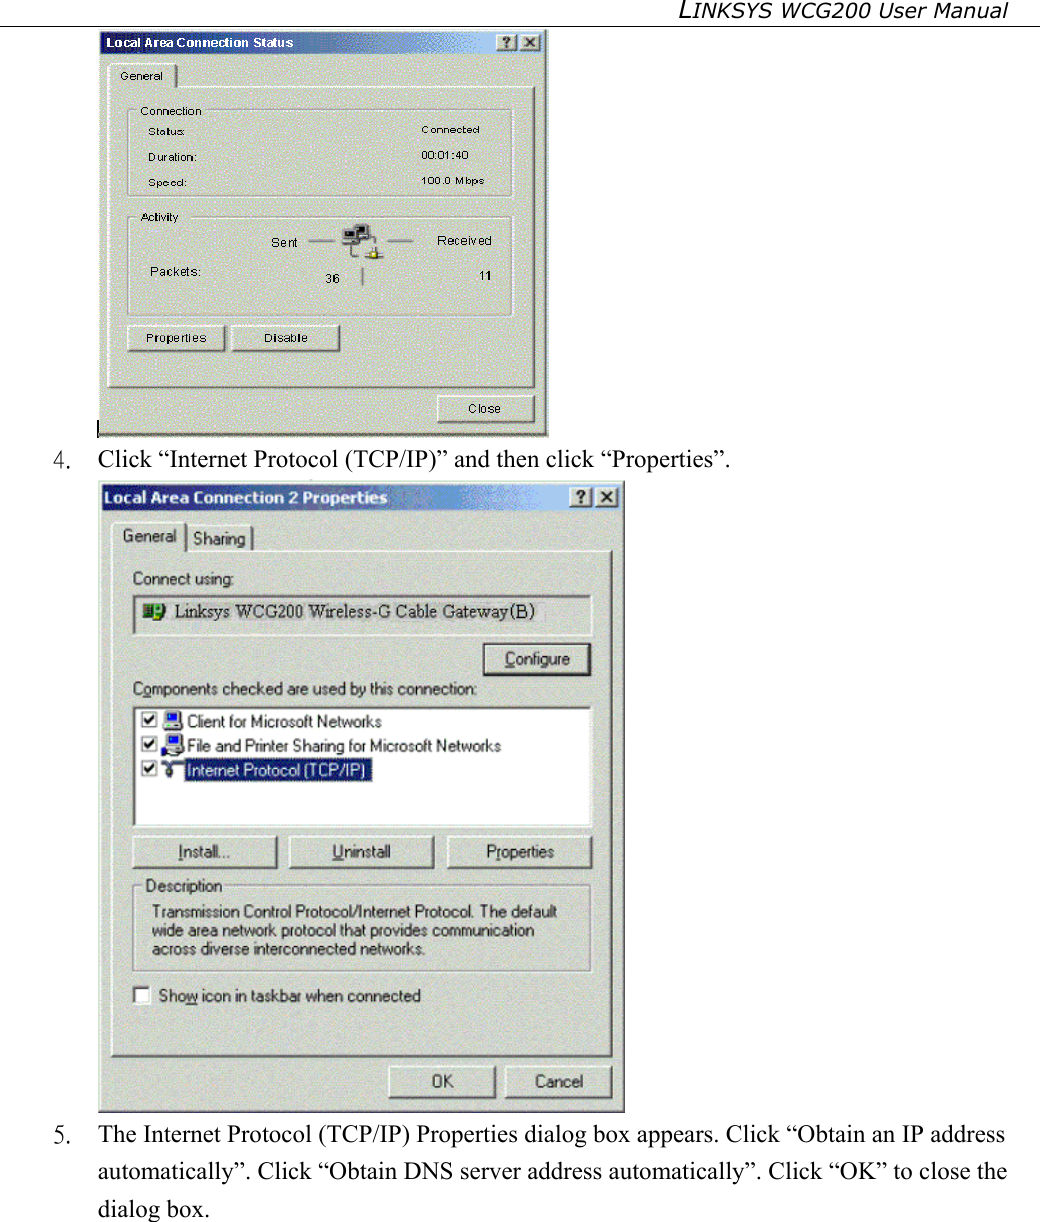 LINKSYS WCG200 User Manual    4.  Click “Internet Protocol (TCP/IP)” and then click “Properties”.  5.  The Internet Protocol (TCP/IP) Properties dialog box appears. Click “Obtain an IP address automatically”. Click “Obtain DNS server address automatically”. Click “OK” to close the dialog box. 